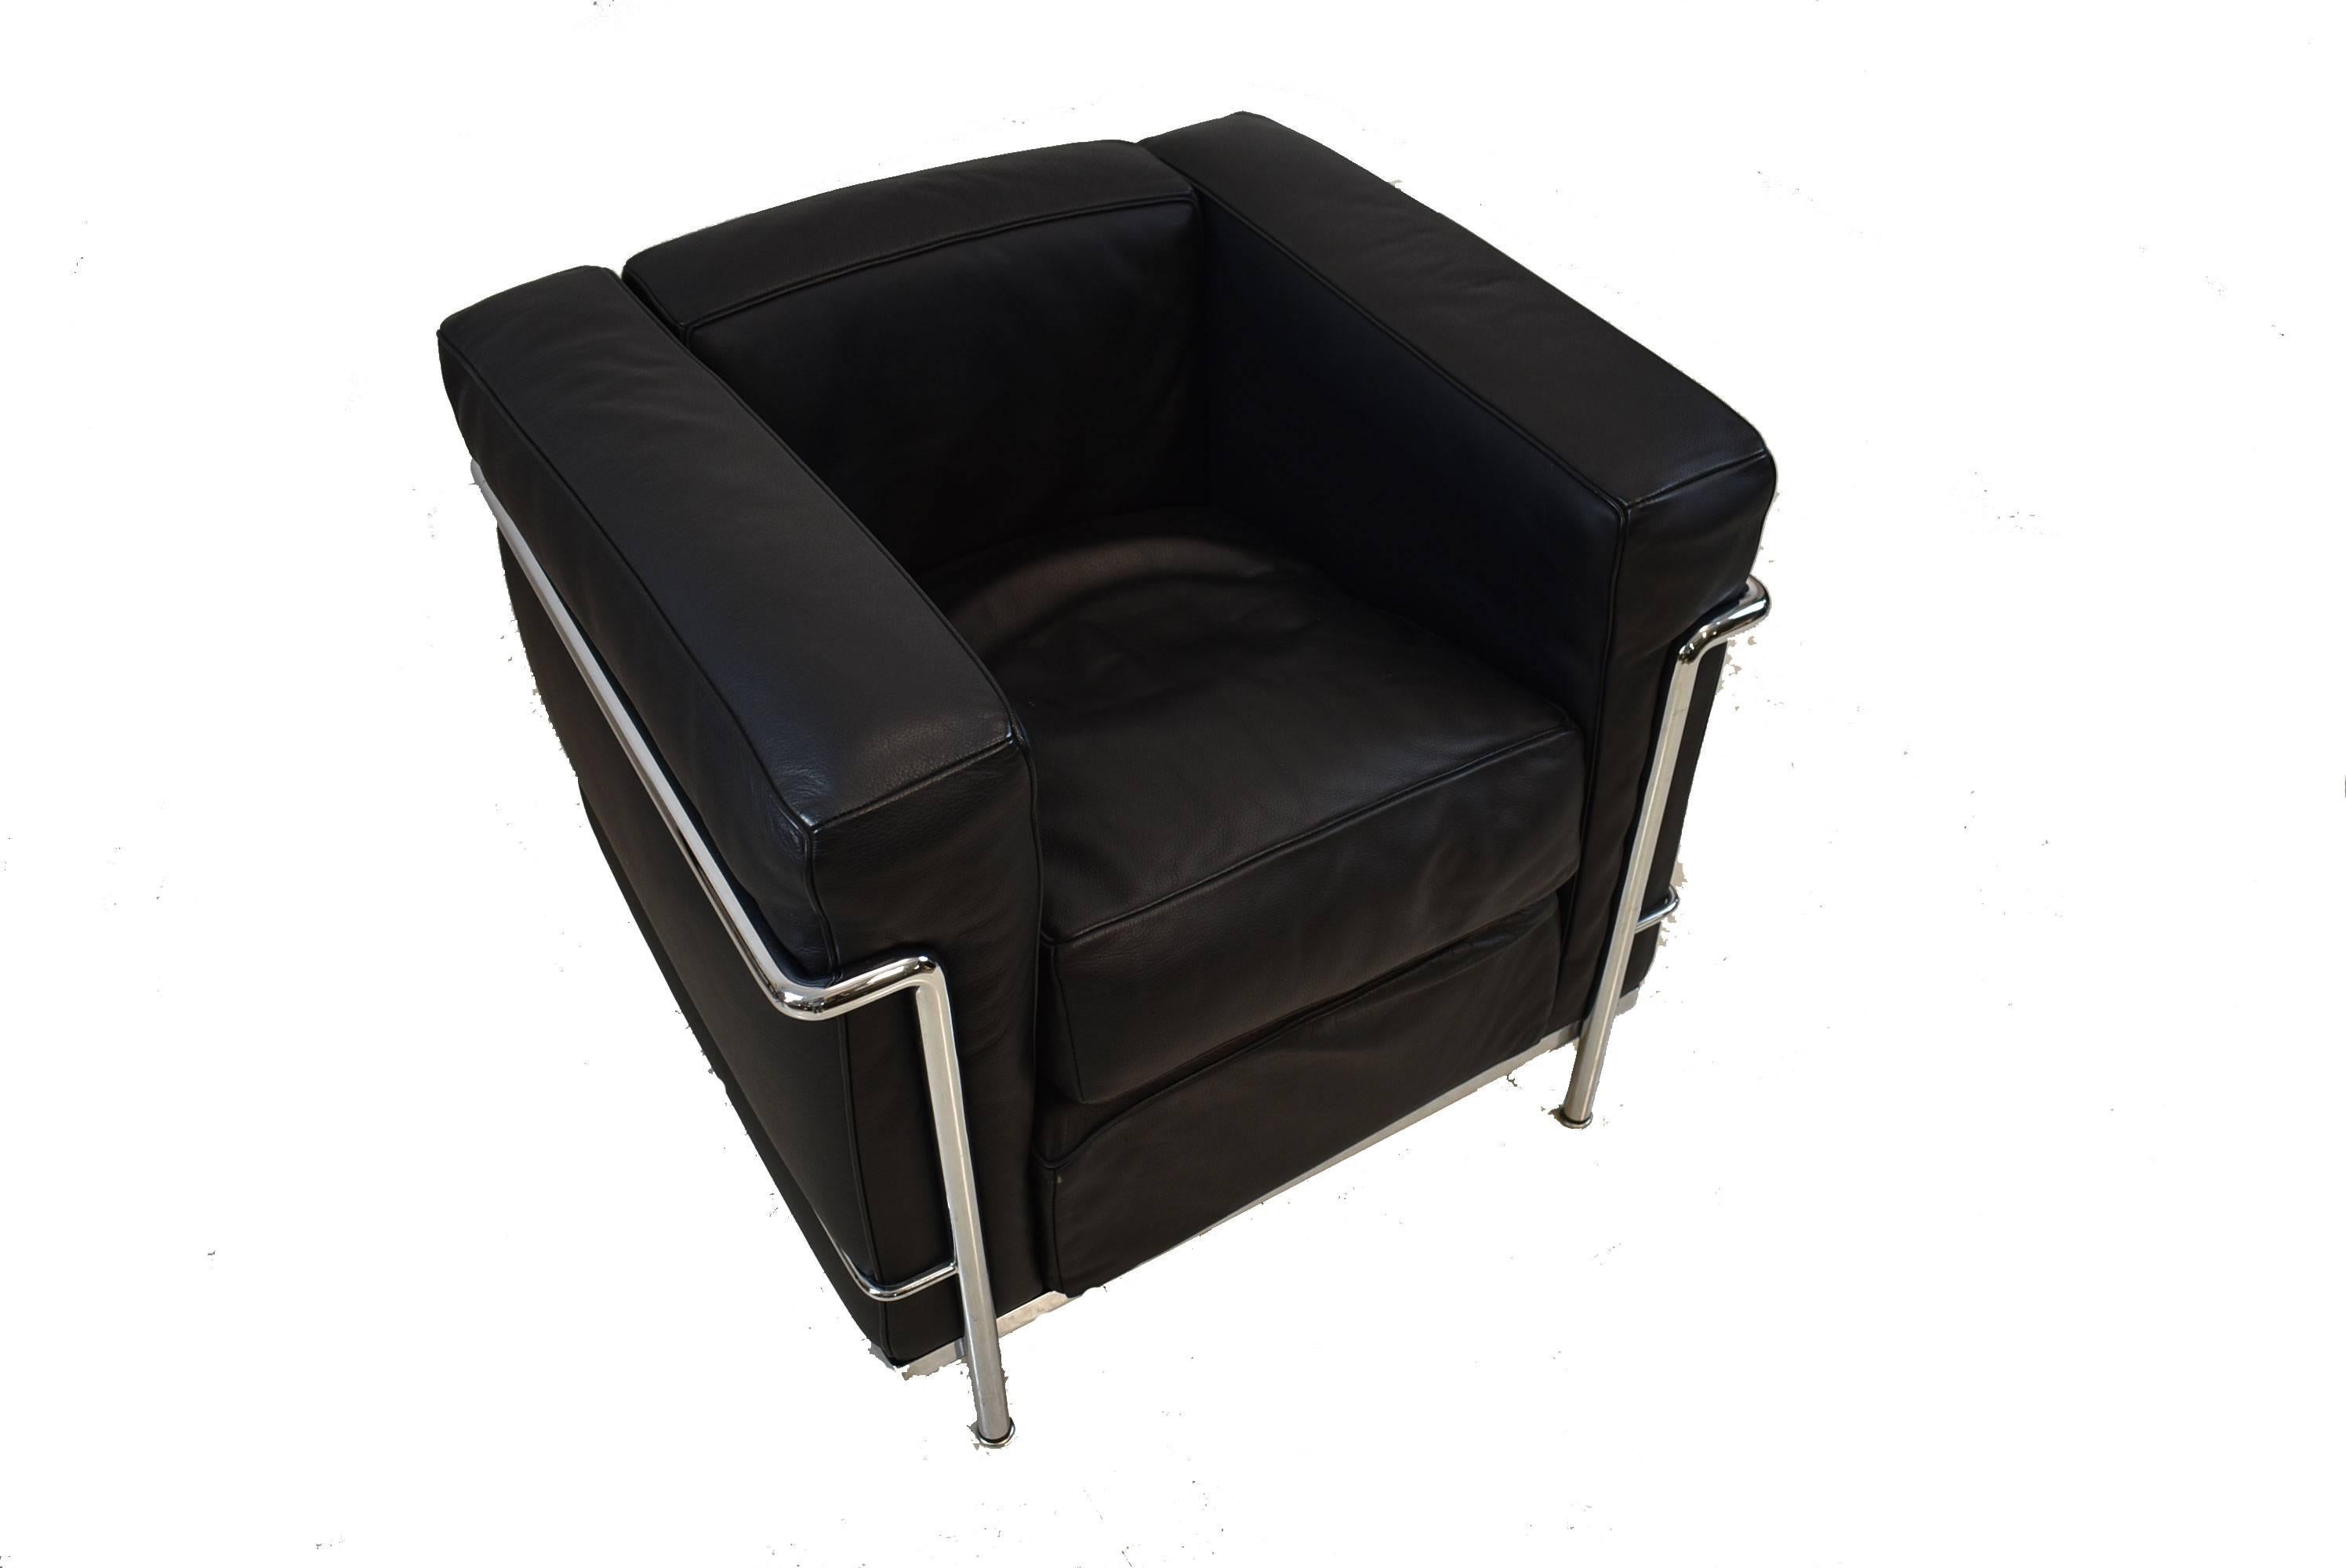 A stunning Mid-Century Modern LC2 Cassina LeCorbusier armchair. This unique chair features black leather cushions and a chrome frame. Stylish and sophisticated, sure to enhance your modern decor.